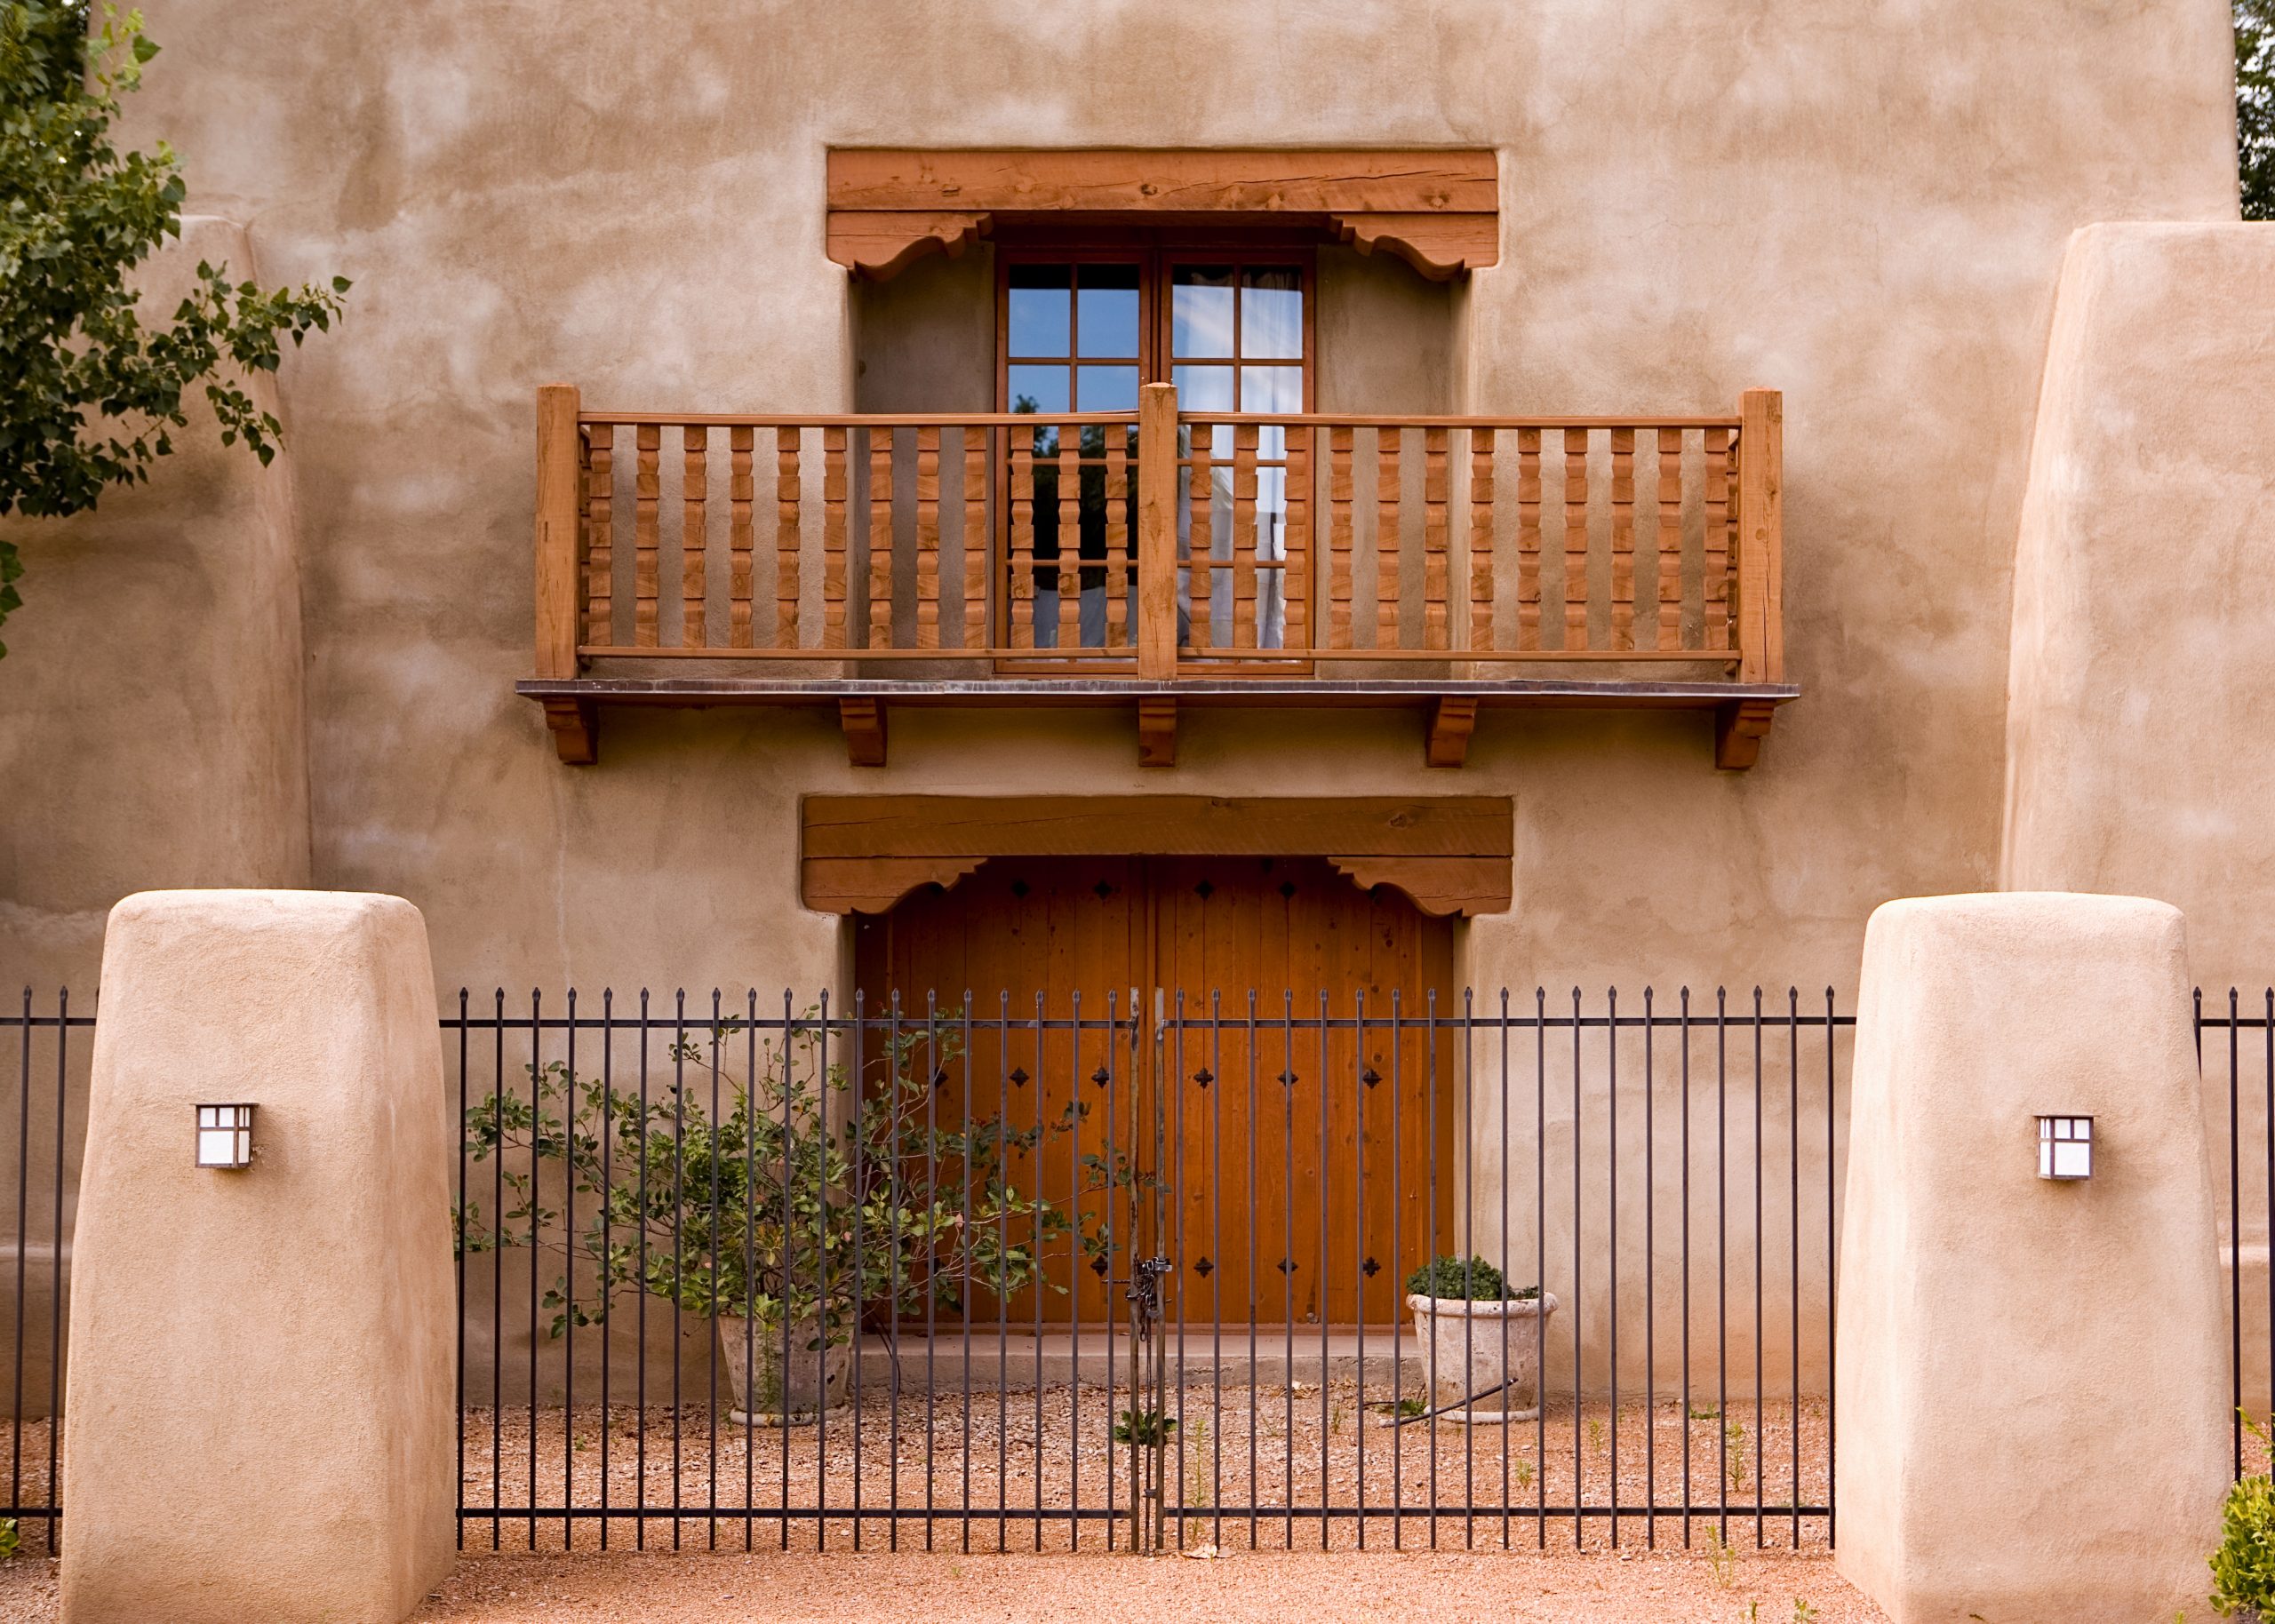 A beatiful Adobe-styled home located in Nob Hill, Albuquerque, New Mexico.